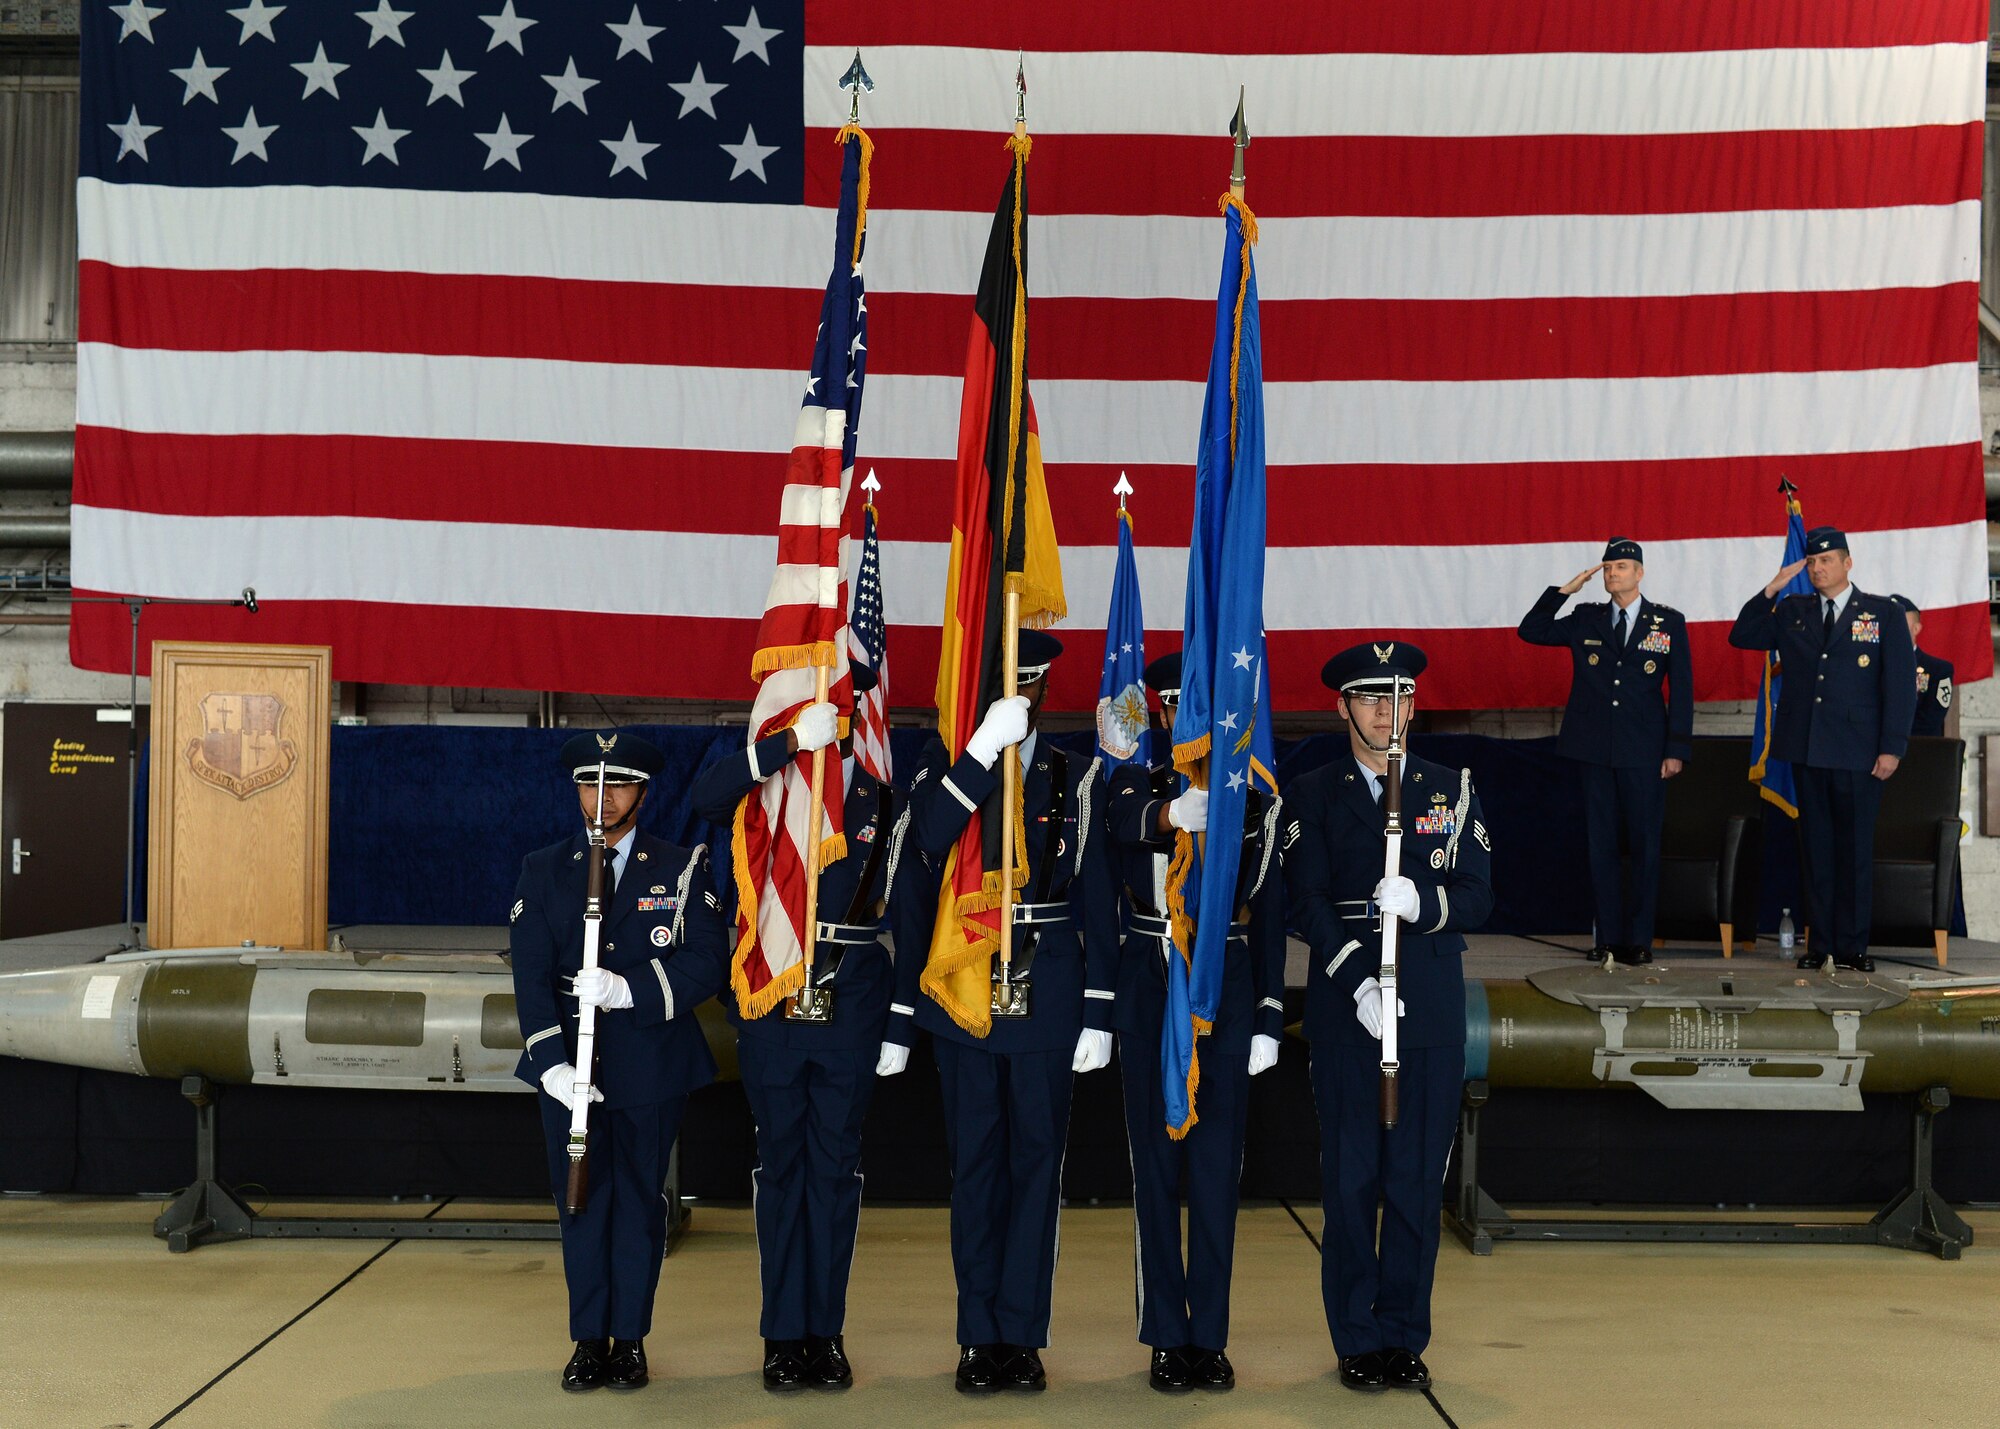 The Spangdahlem honor guard posts the colors for the national anthem during the 52nd Fighter Wing assumption of command ceremony in Hangar 1 at Spangdahlem Air Base, Germany, July 11, 2014. More than 500 Saber Airmen attended the ceremony where U.S. Air Force Col. Peter Bilodeau assumed command of the wing. (U.S. Air Force photo by Staff Sgt. Daryl Knee/Released)